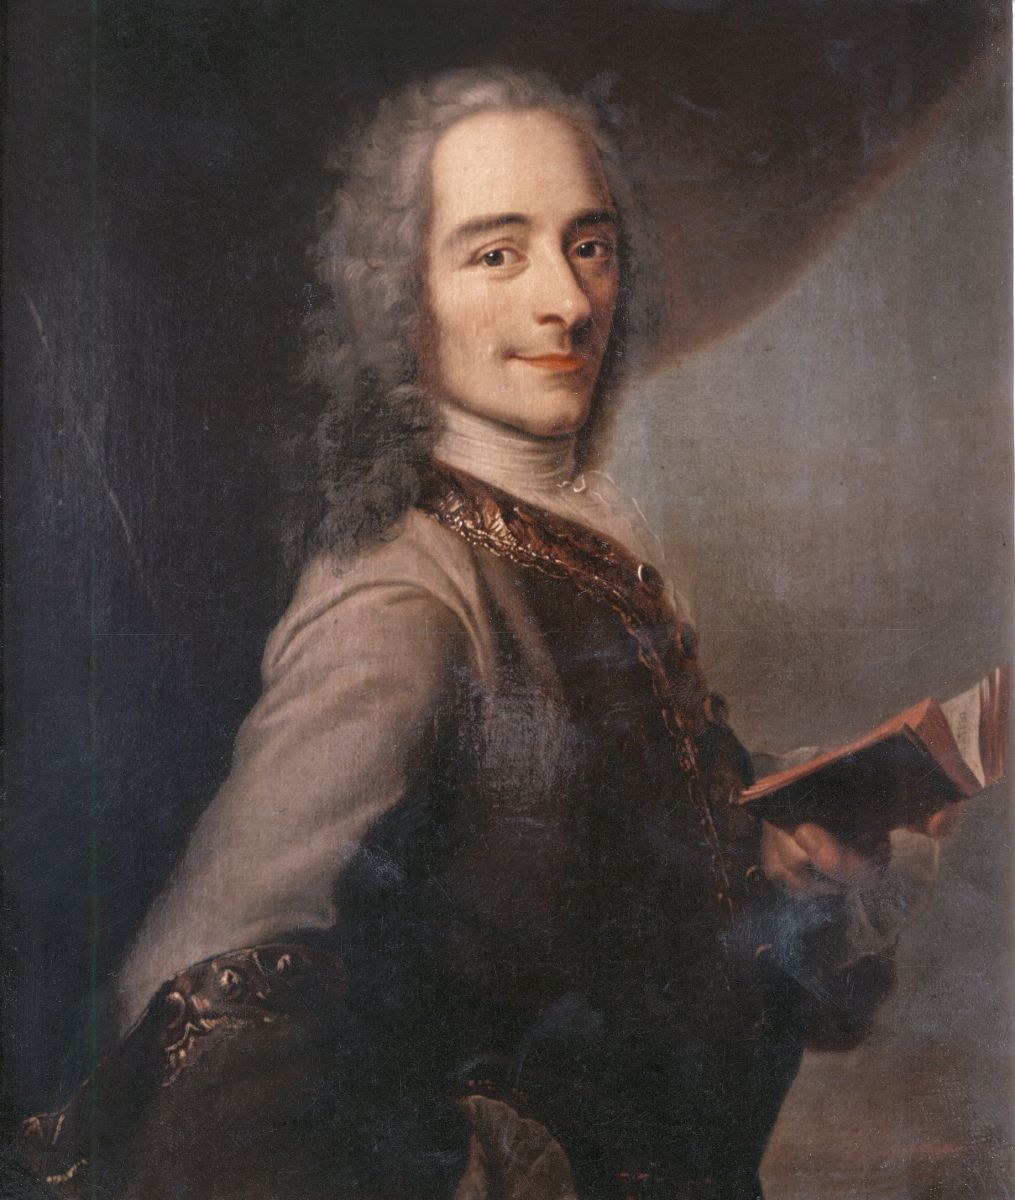 hith-10-things-voltaire-painting-104418281-2-1673092259706-1673092260732743842434-1673146075904-16731460761991493879195.jpg